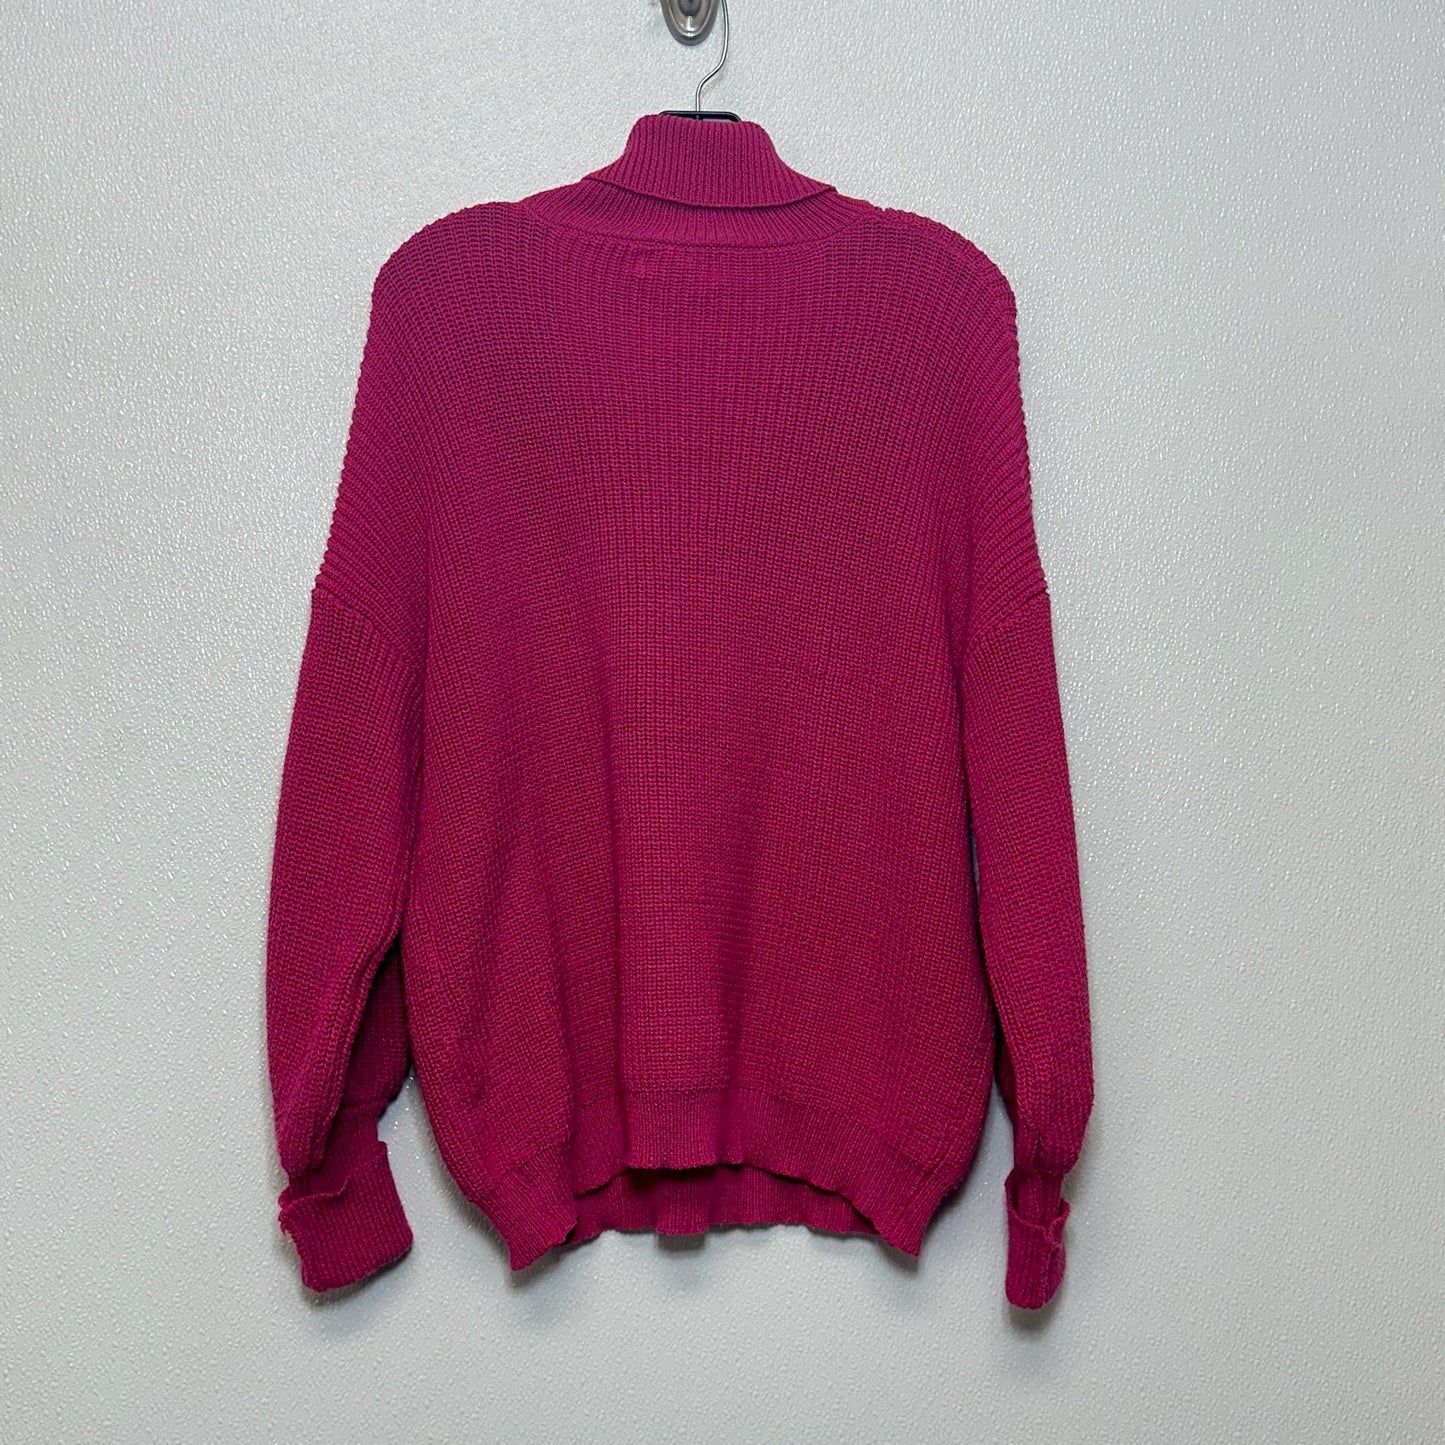 Sweater By Zenana Outfitters  Size: Xl